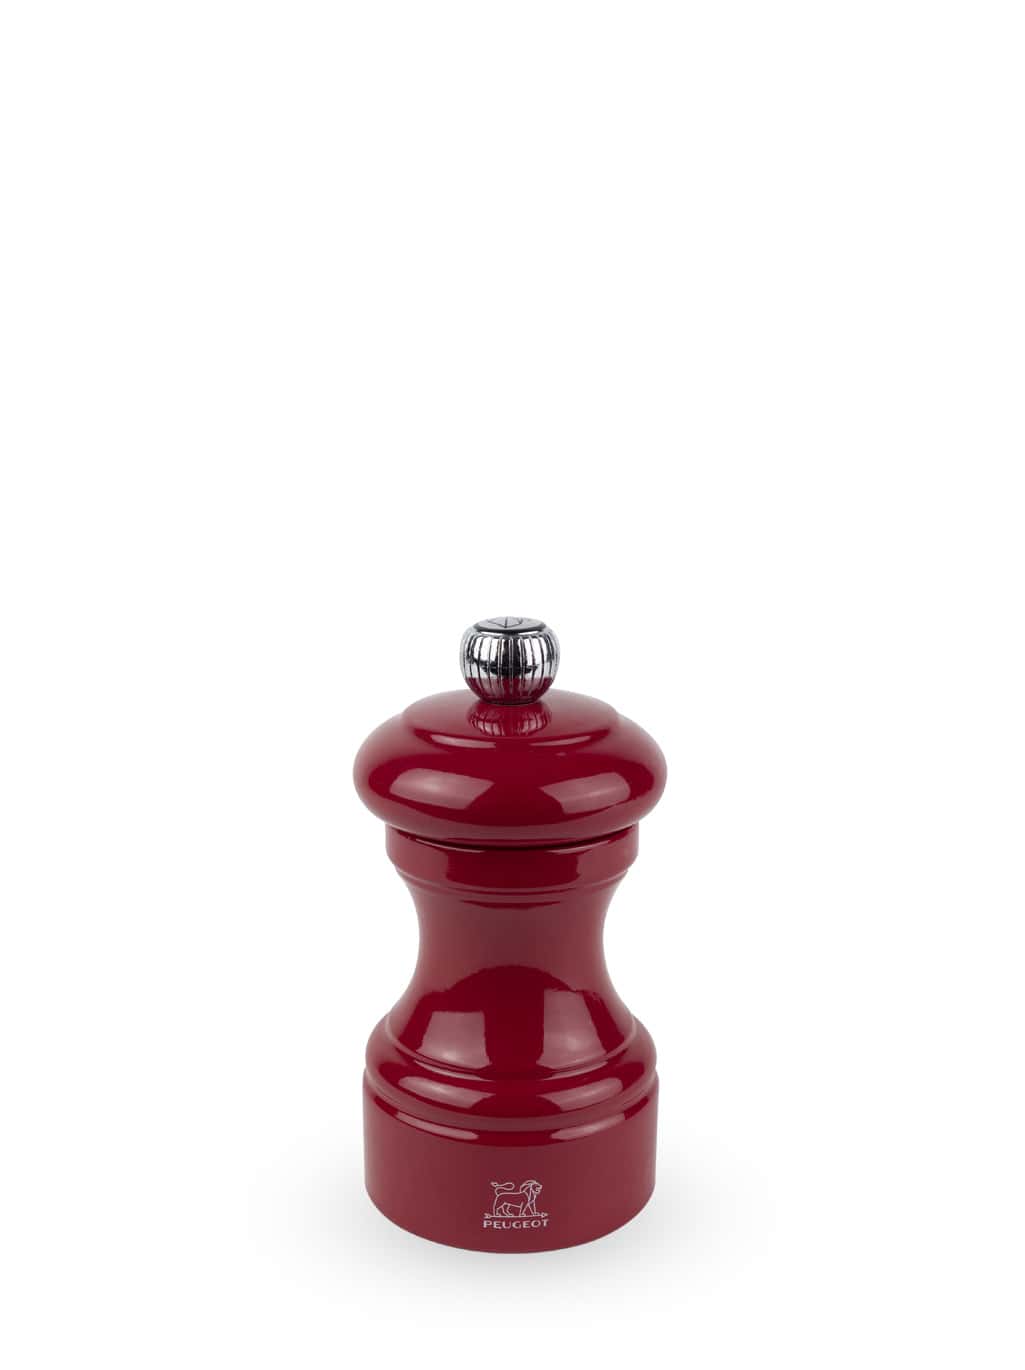 Classic French Red Wood Pepper Mill - High Gloss - 2 1/4 x 2 1/4 x 7 1/2  - 1 count box